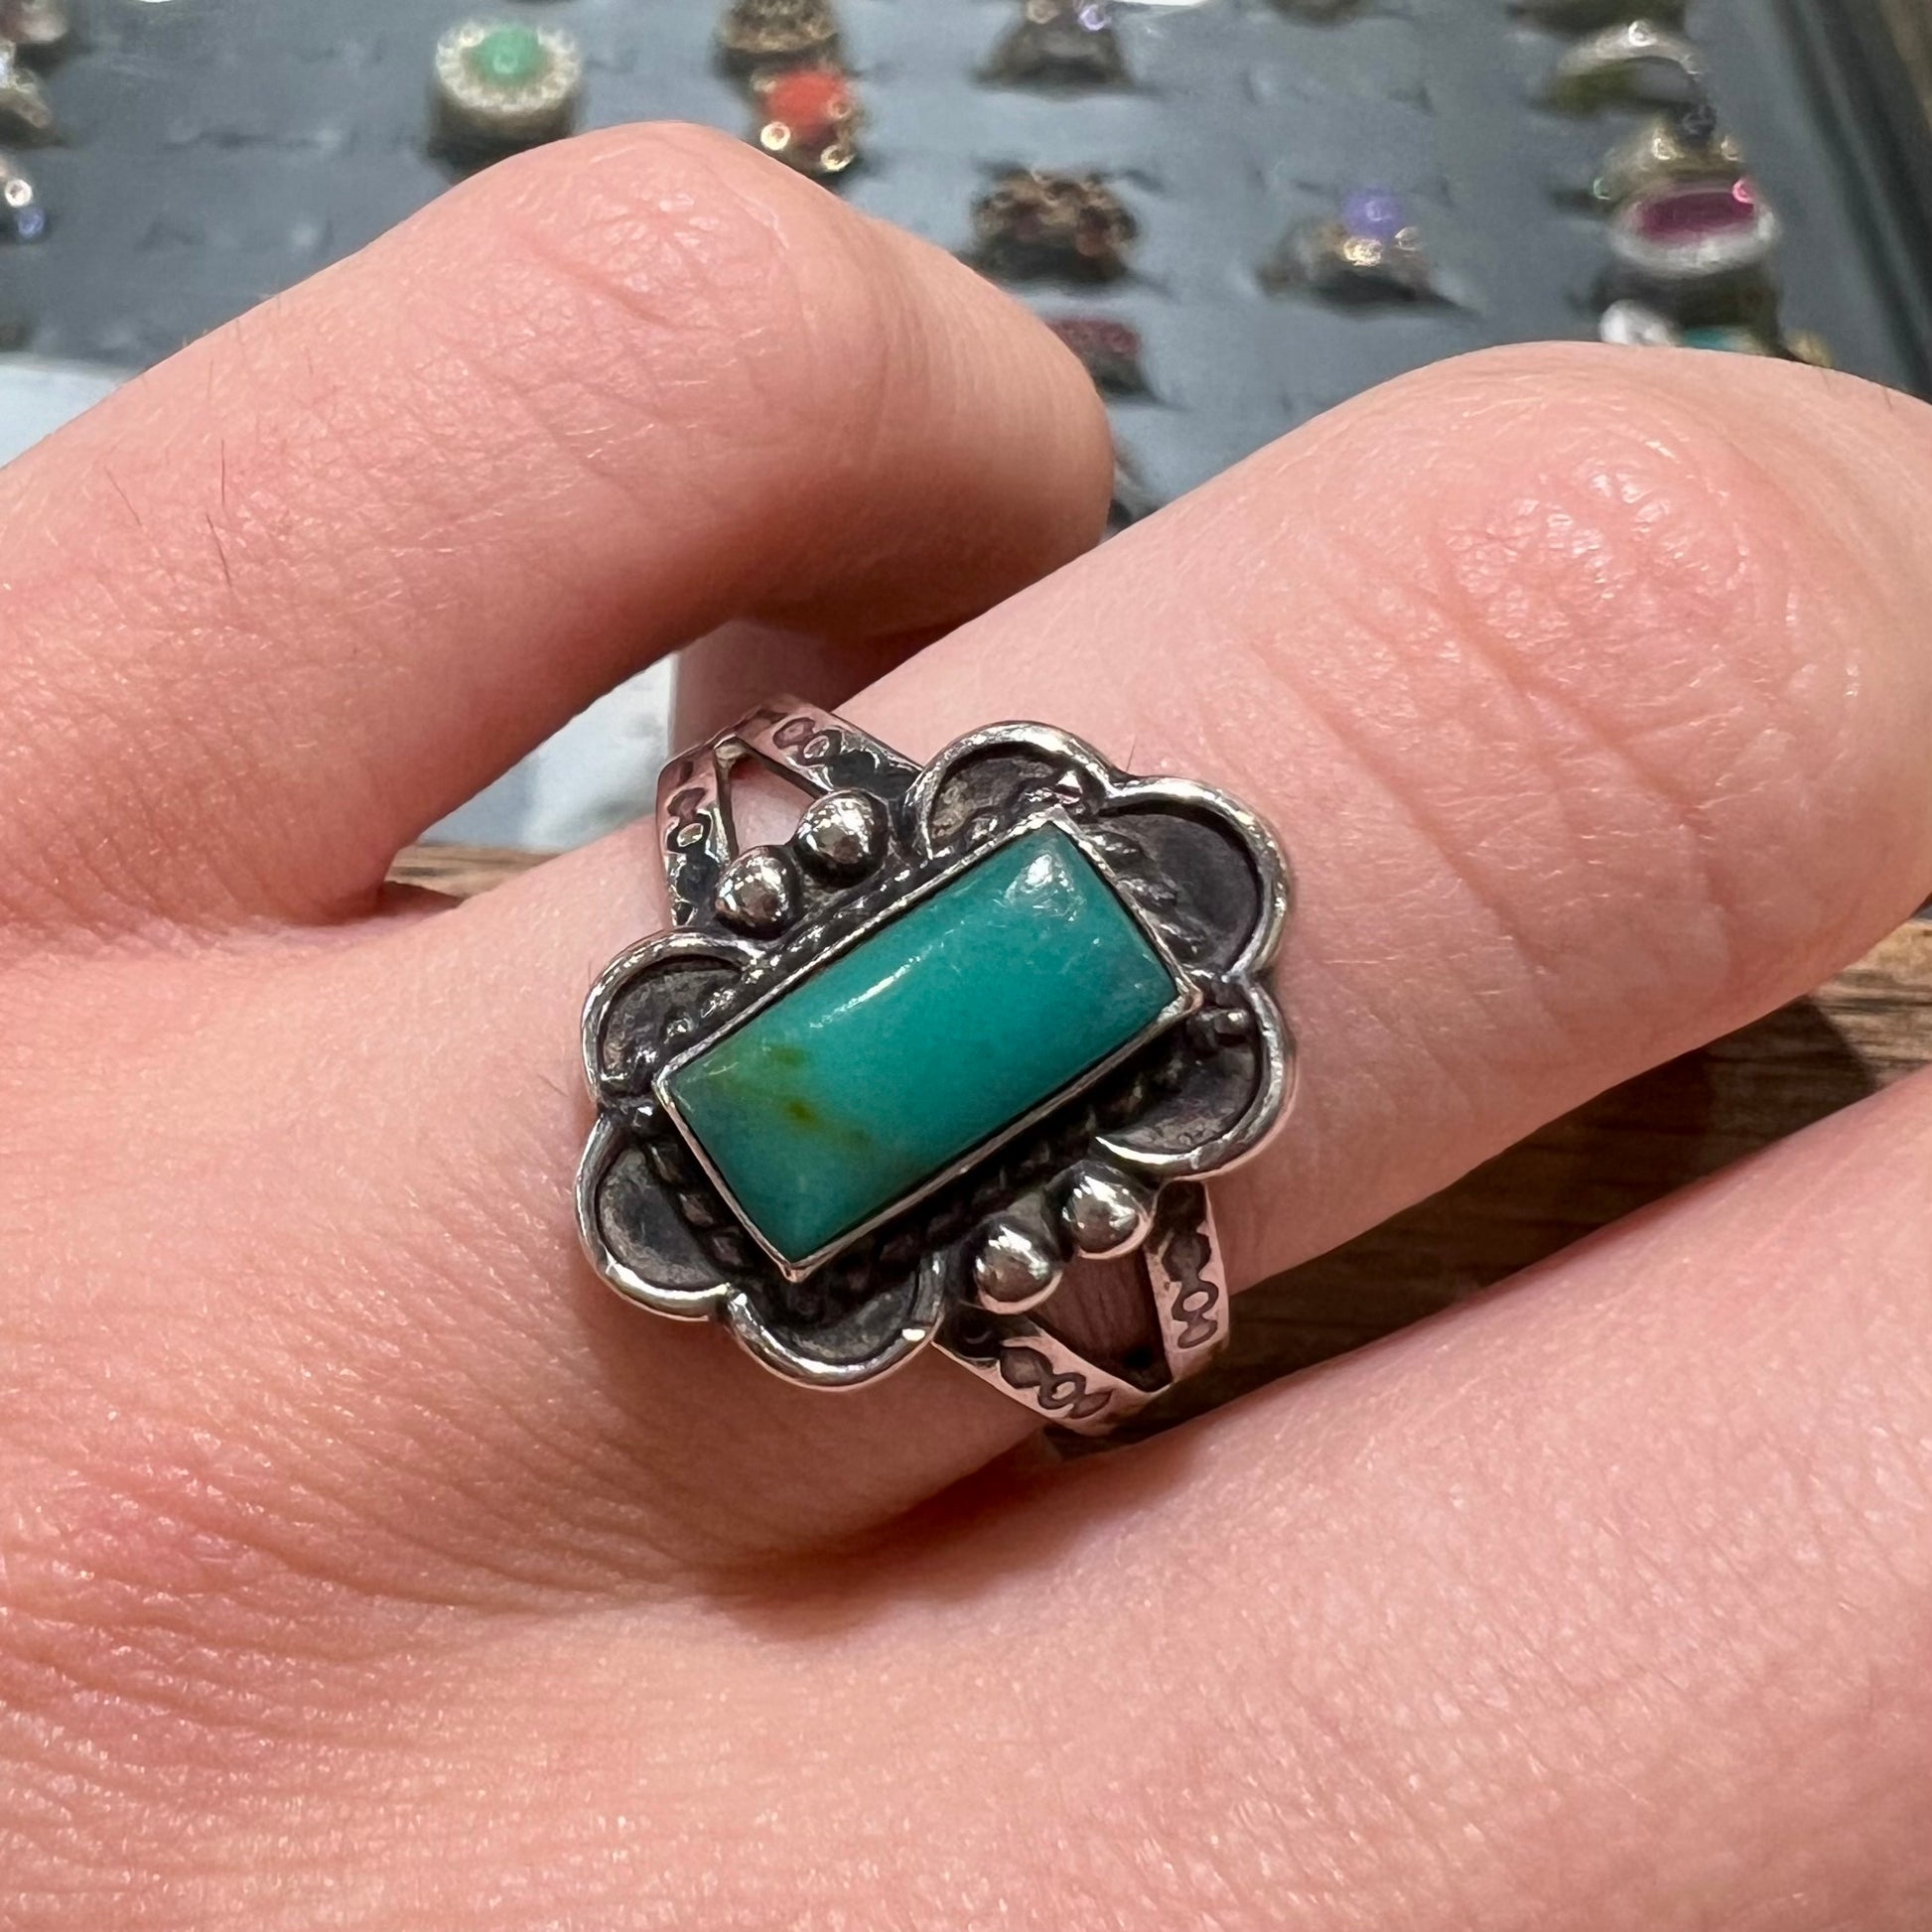 A ladies' silver ring stamped with Southwest style designs and set with a rectangular cabochon cut Royston turquoise stone.